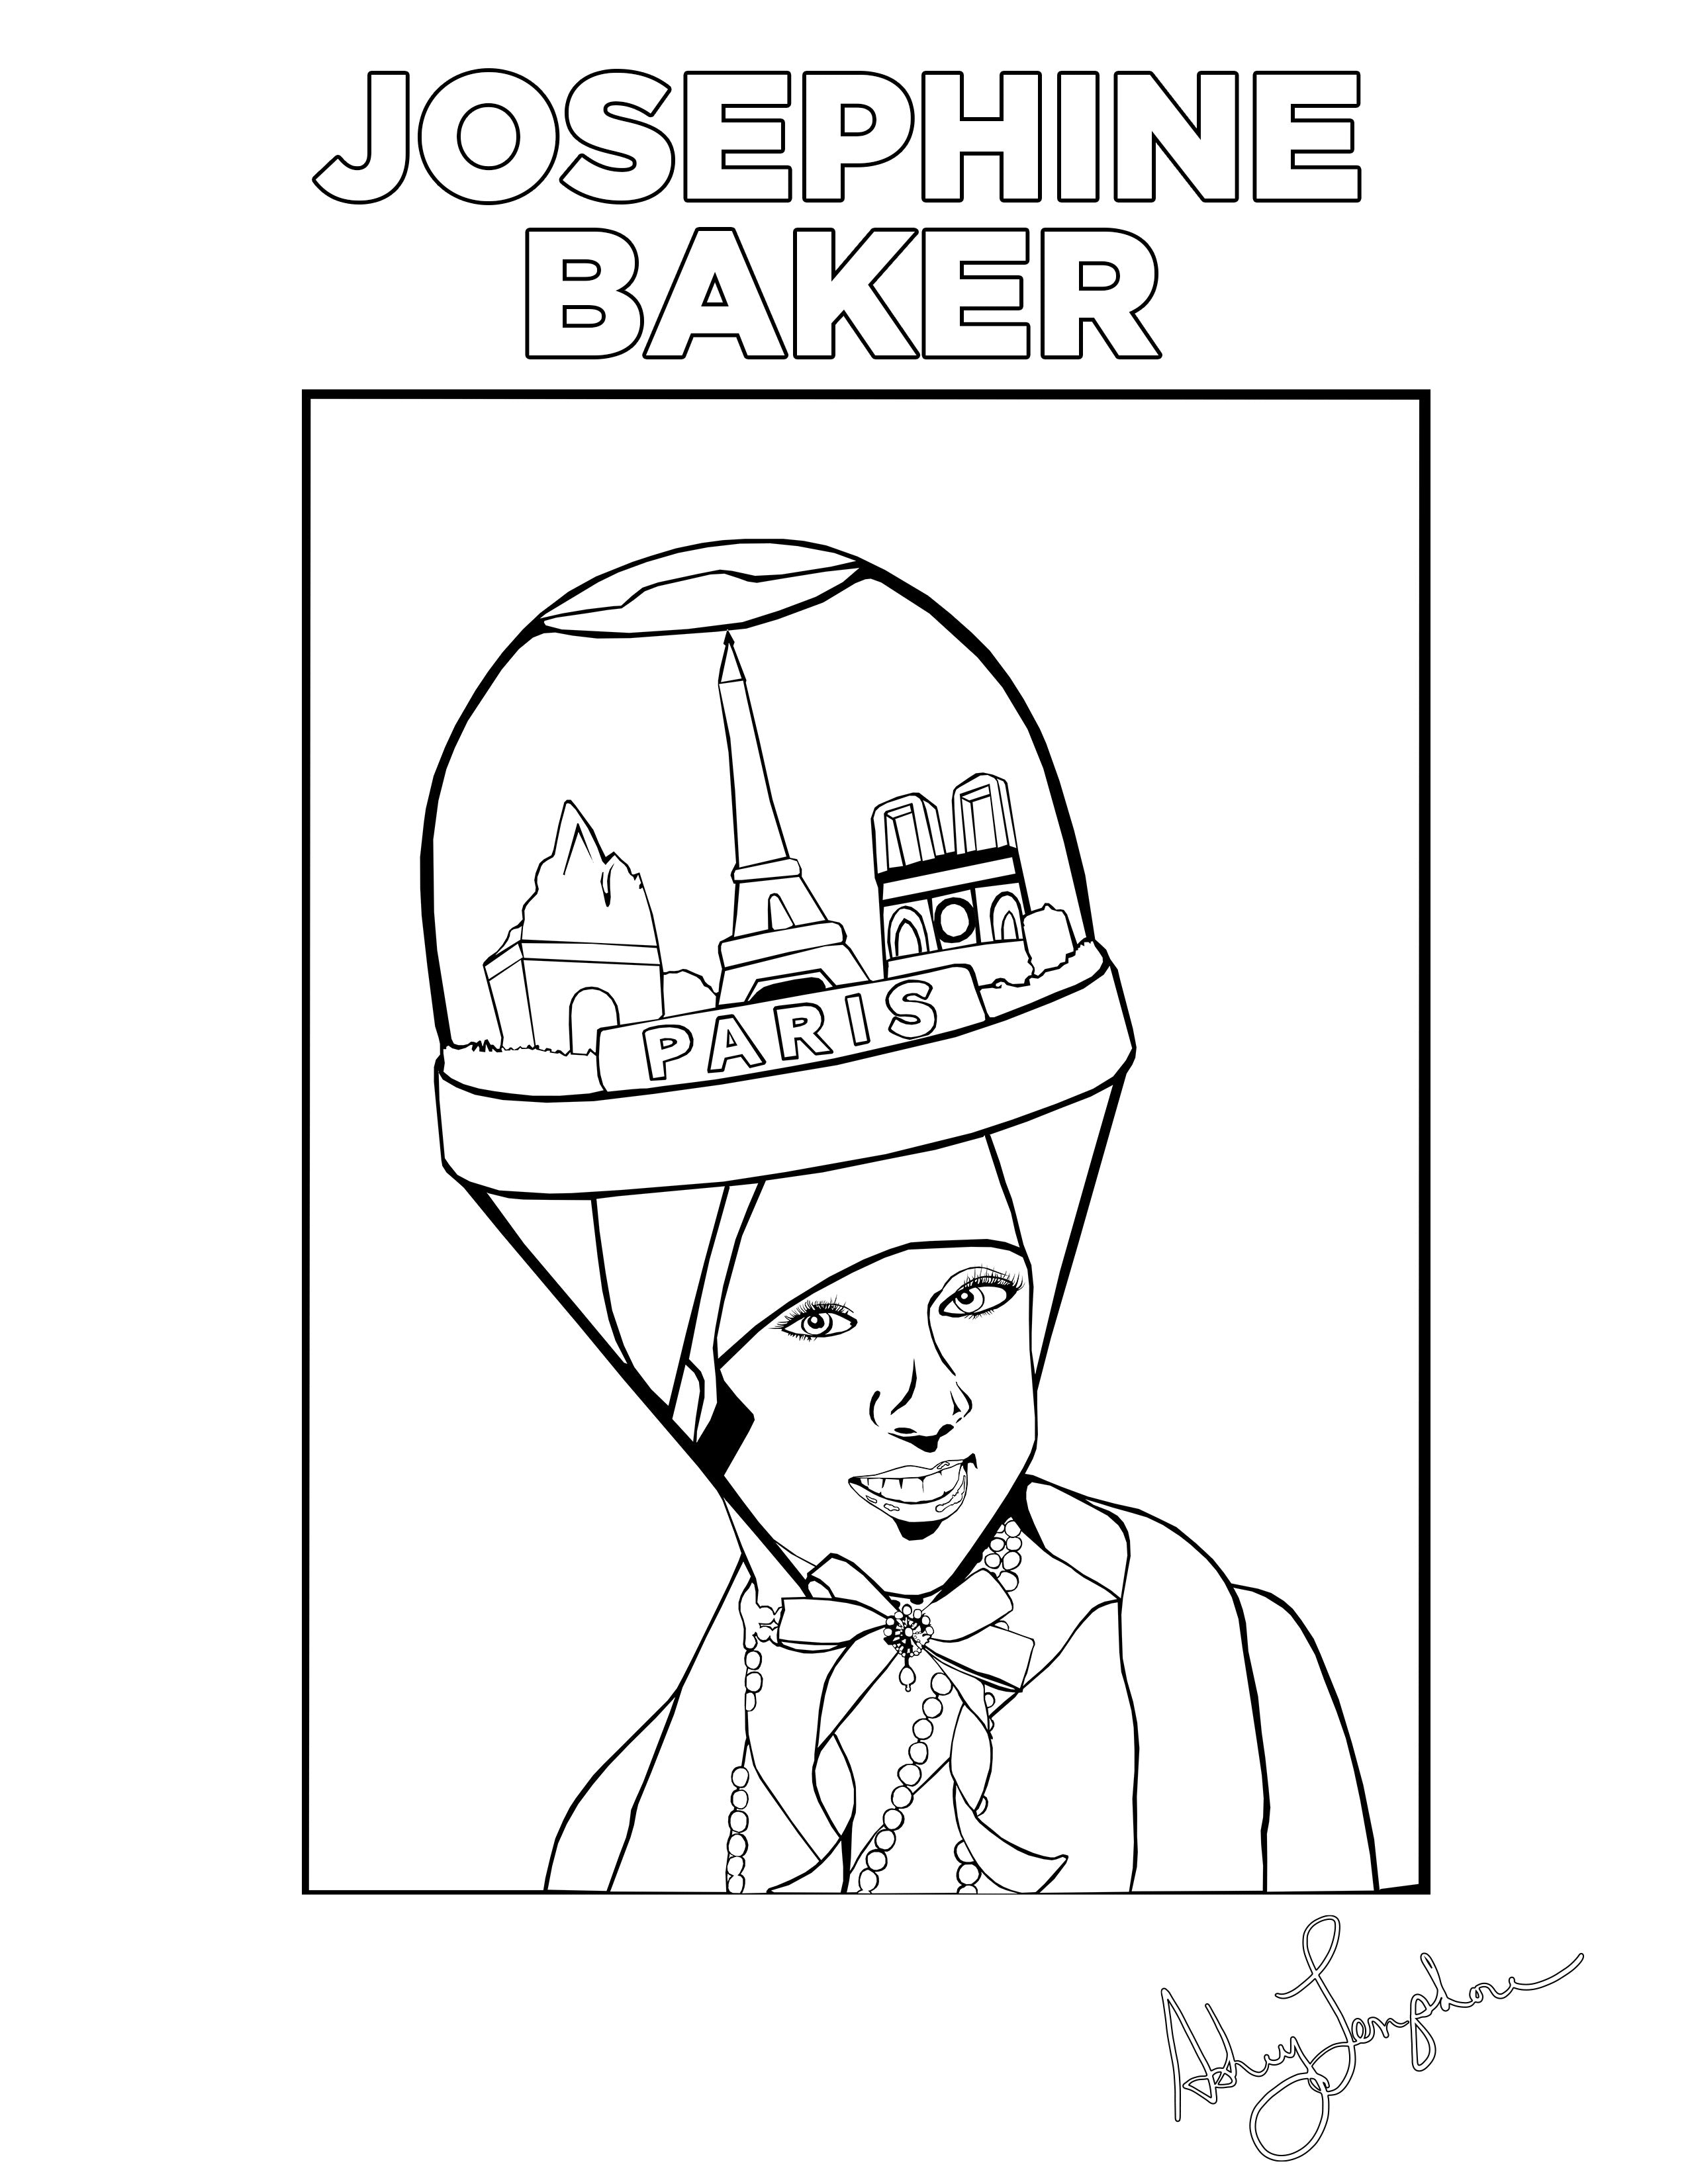 Ashley Longshore coloring pages featuring Josephine Baker.